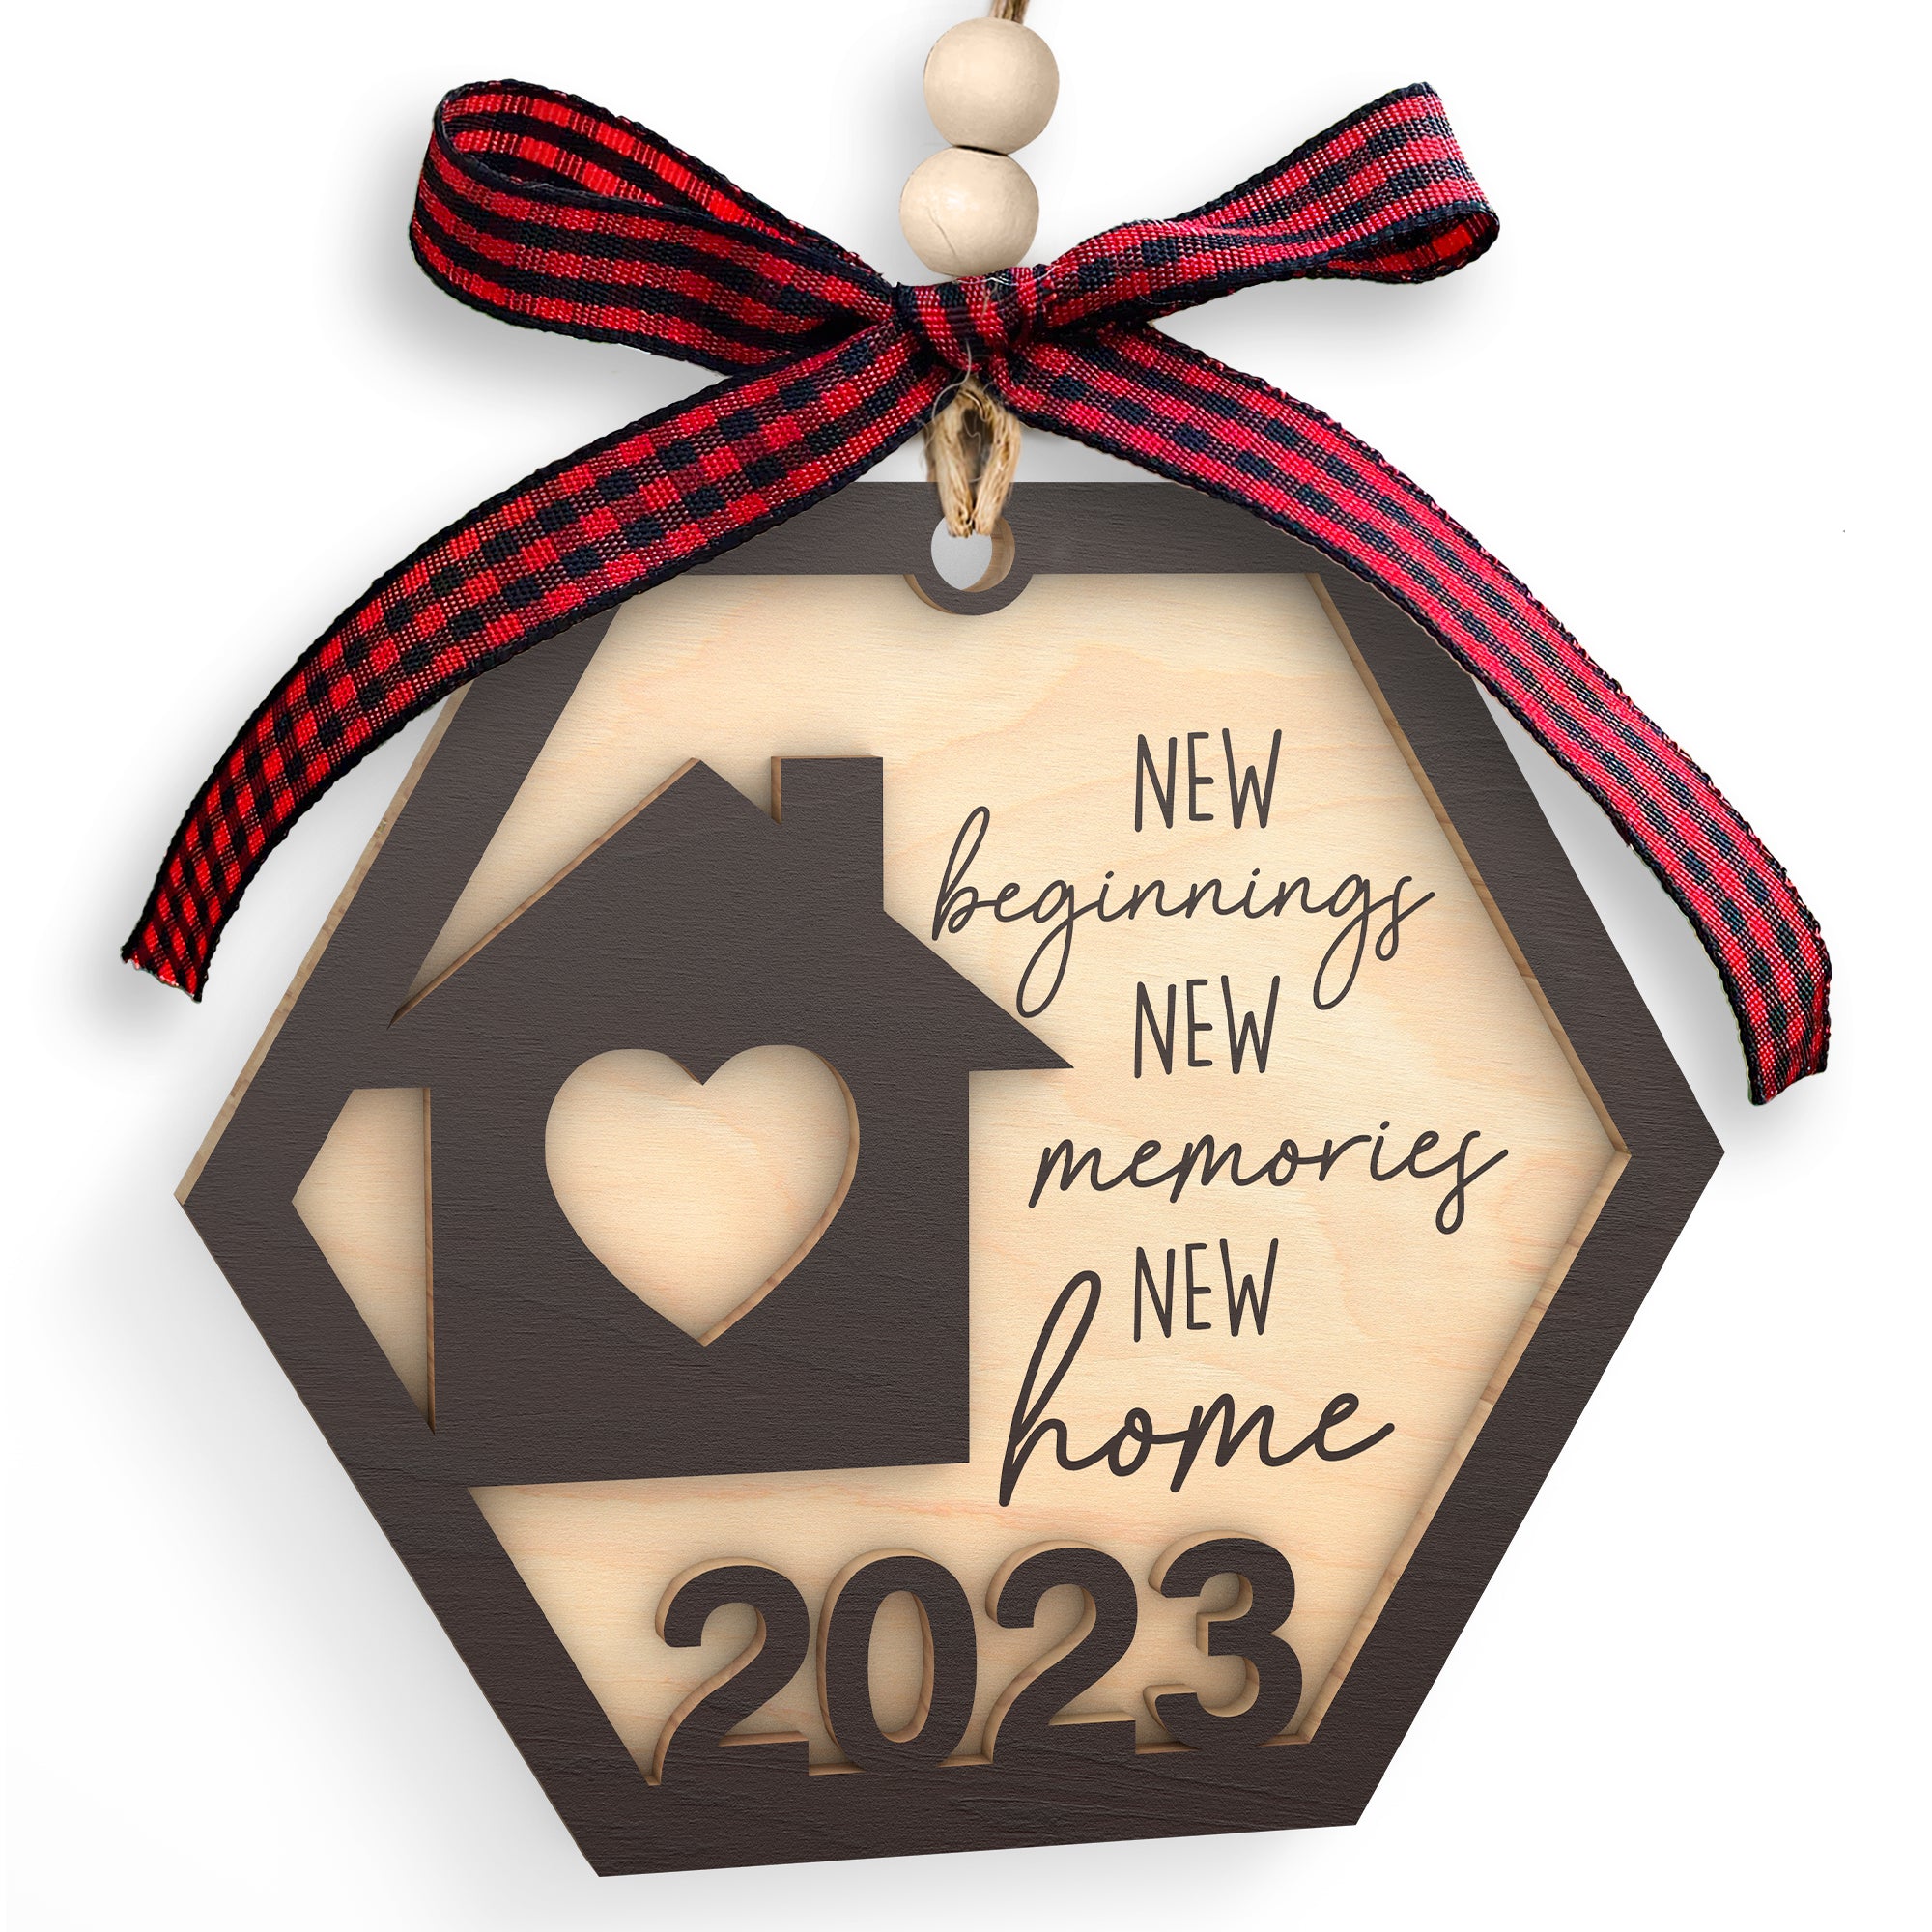 17 New Home Gifts - Best Housewarming Gifts For 2023